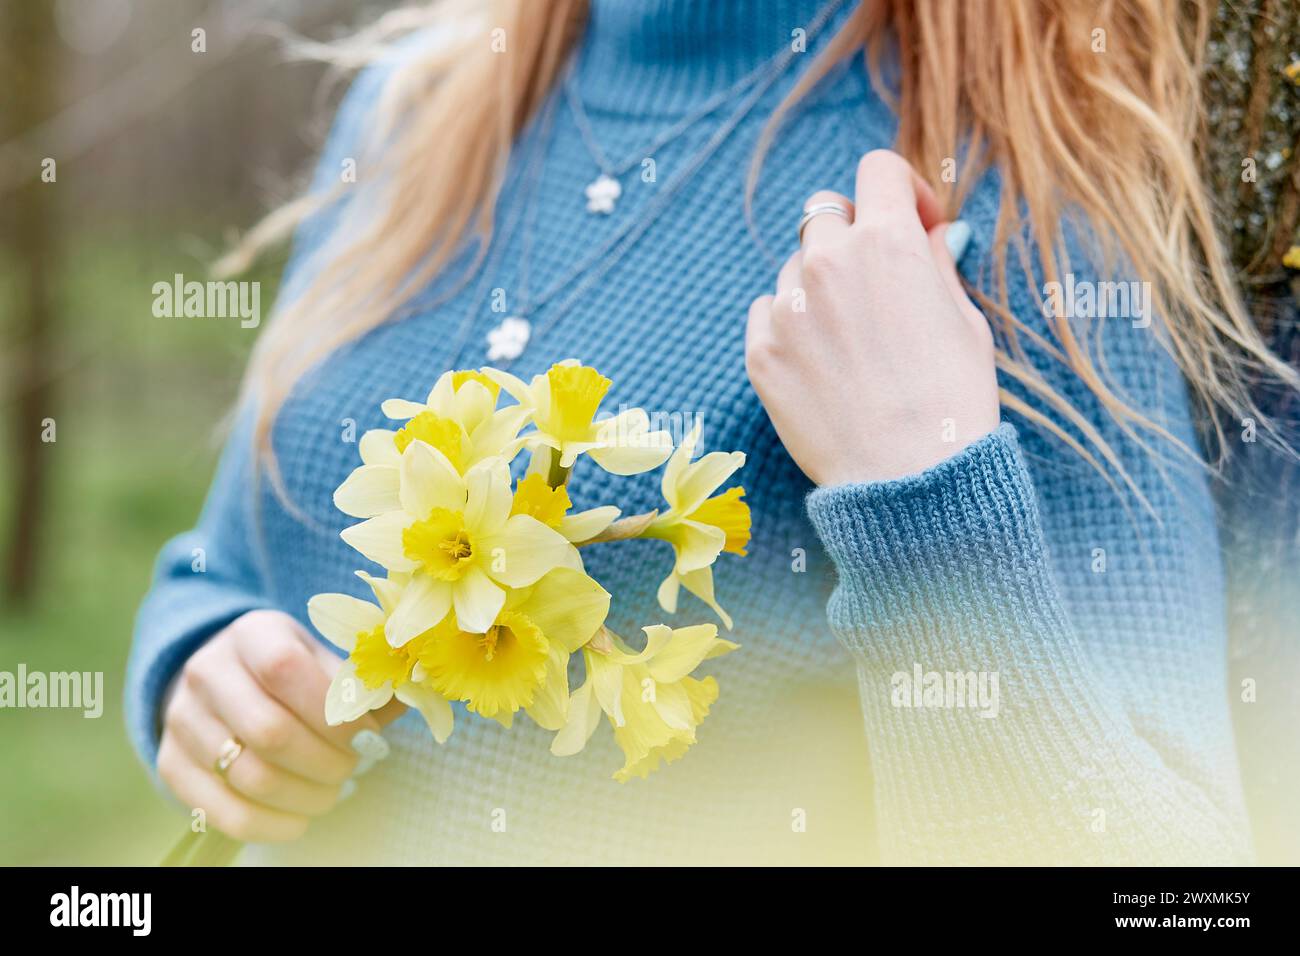 Woman holds daffodils, connected with nature, cottage core, mindfulness, self-exploration concept. Copy space. Stock Photo